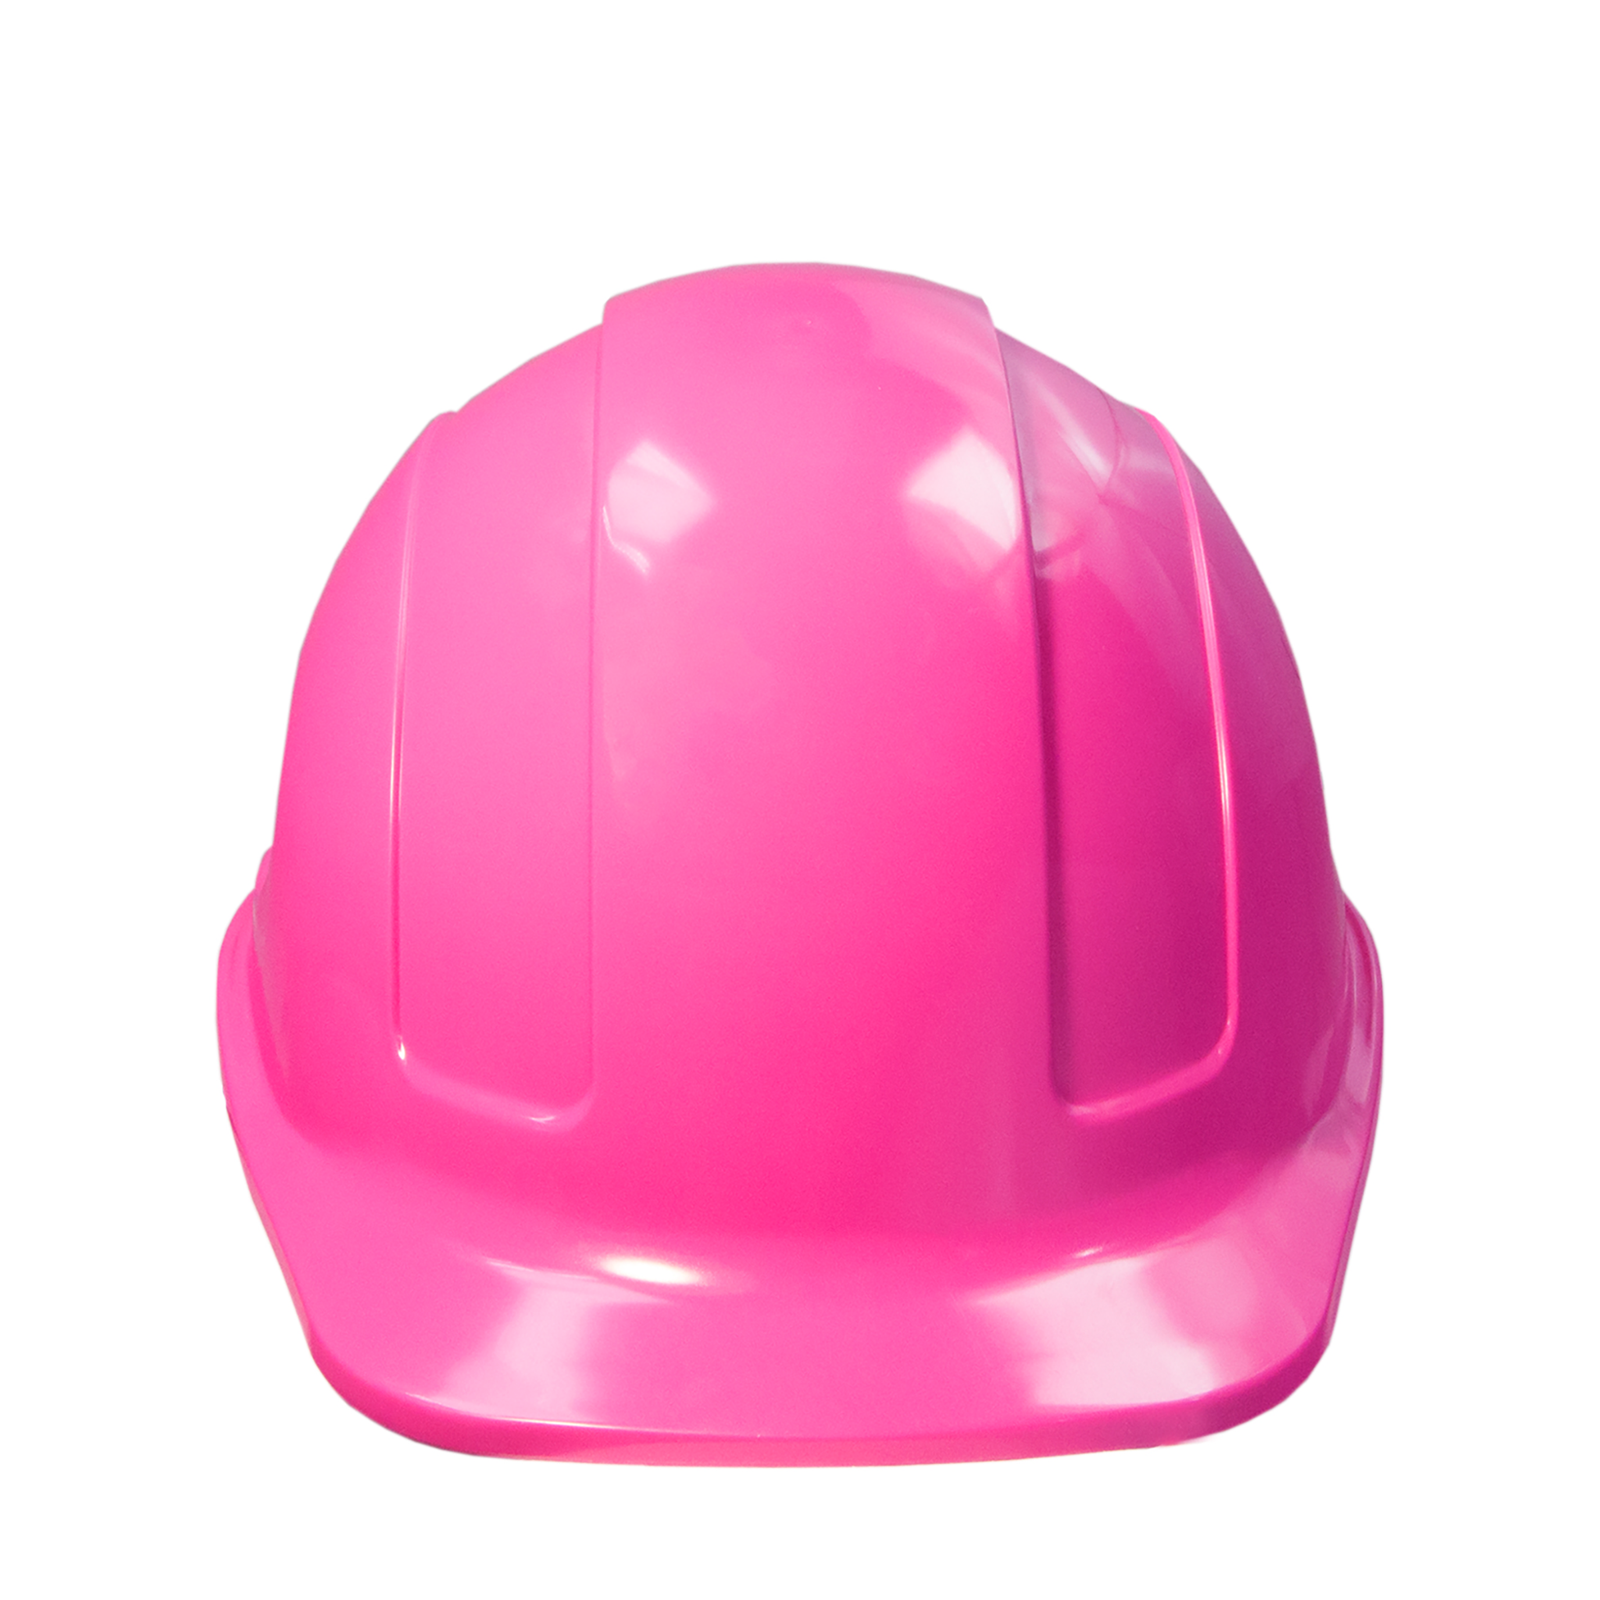 Non vented HDPE shell cap style hard hat with side slots to place accessories